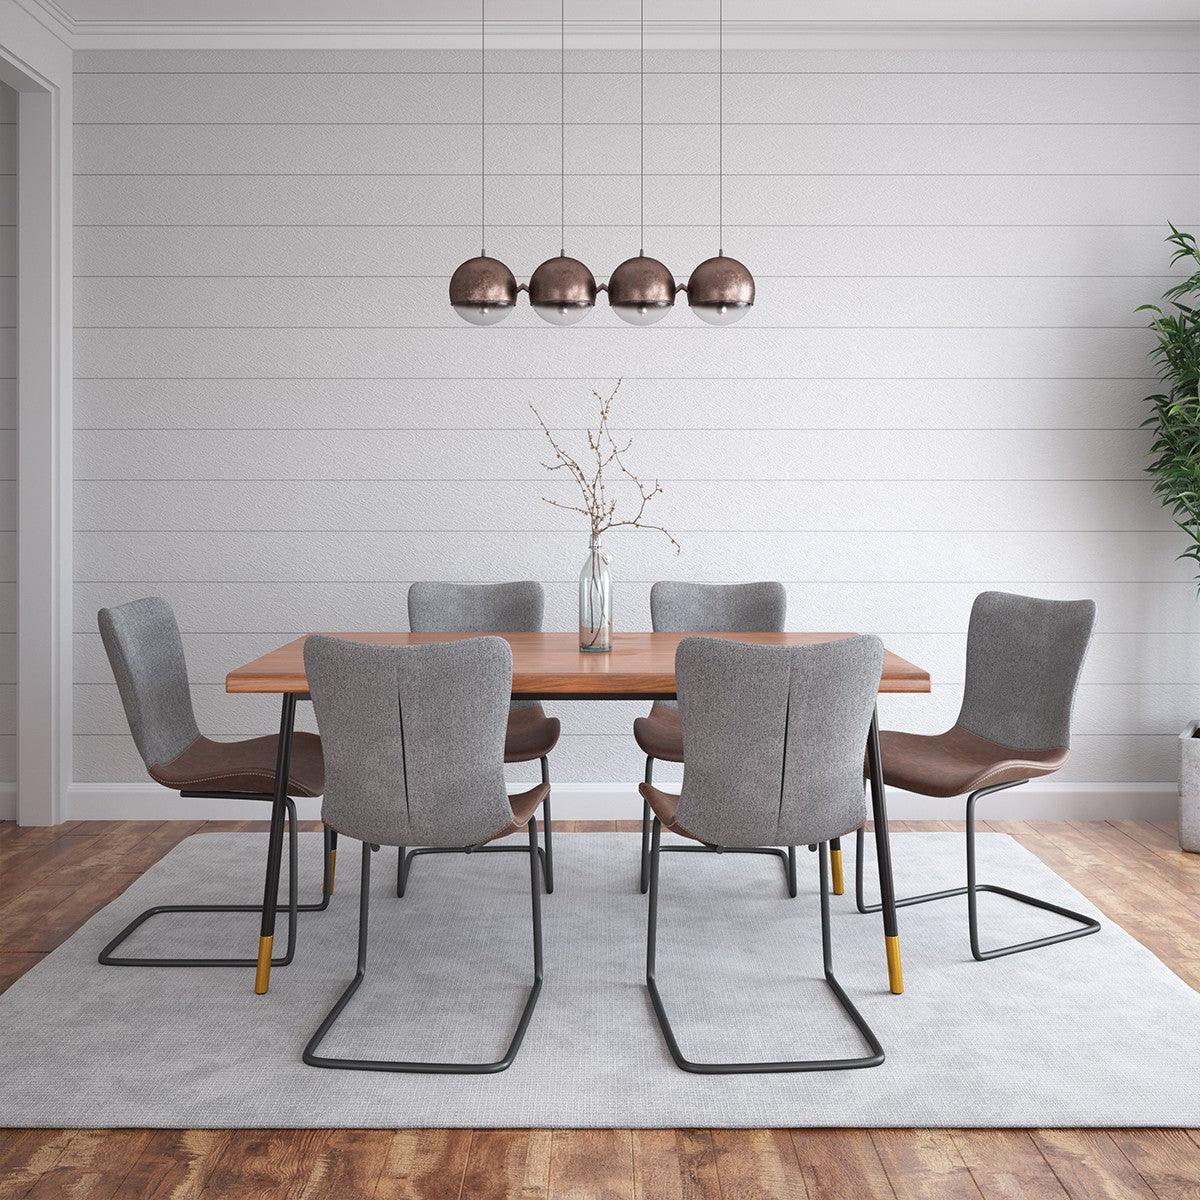 Brown Wood Dining Table with Black Steel Legs - AFS